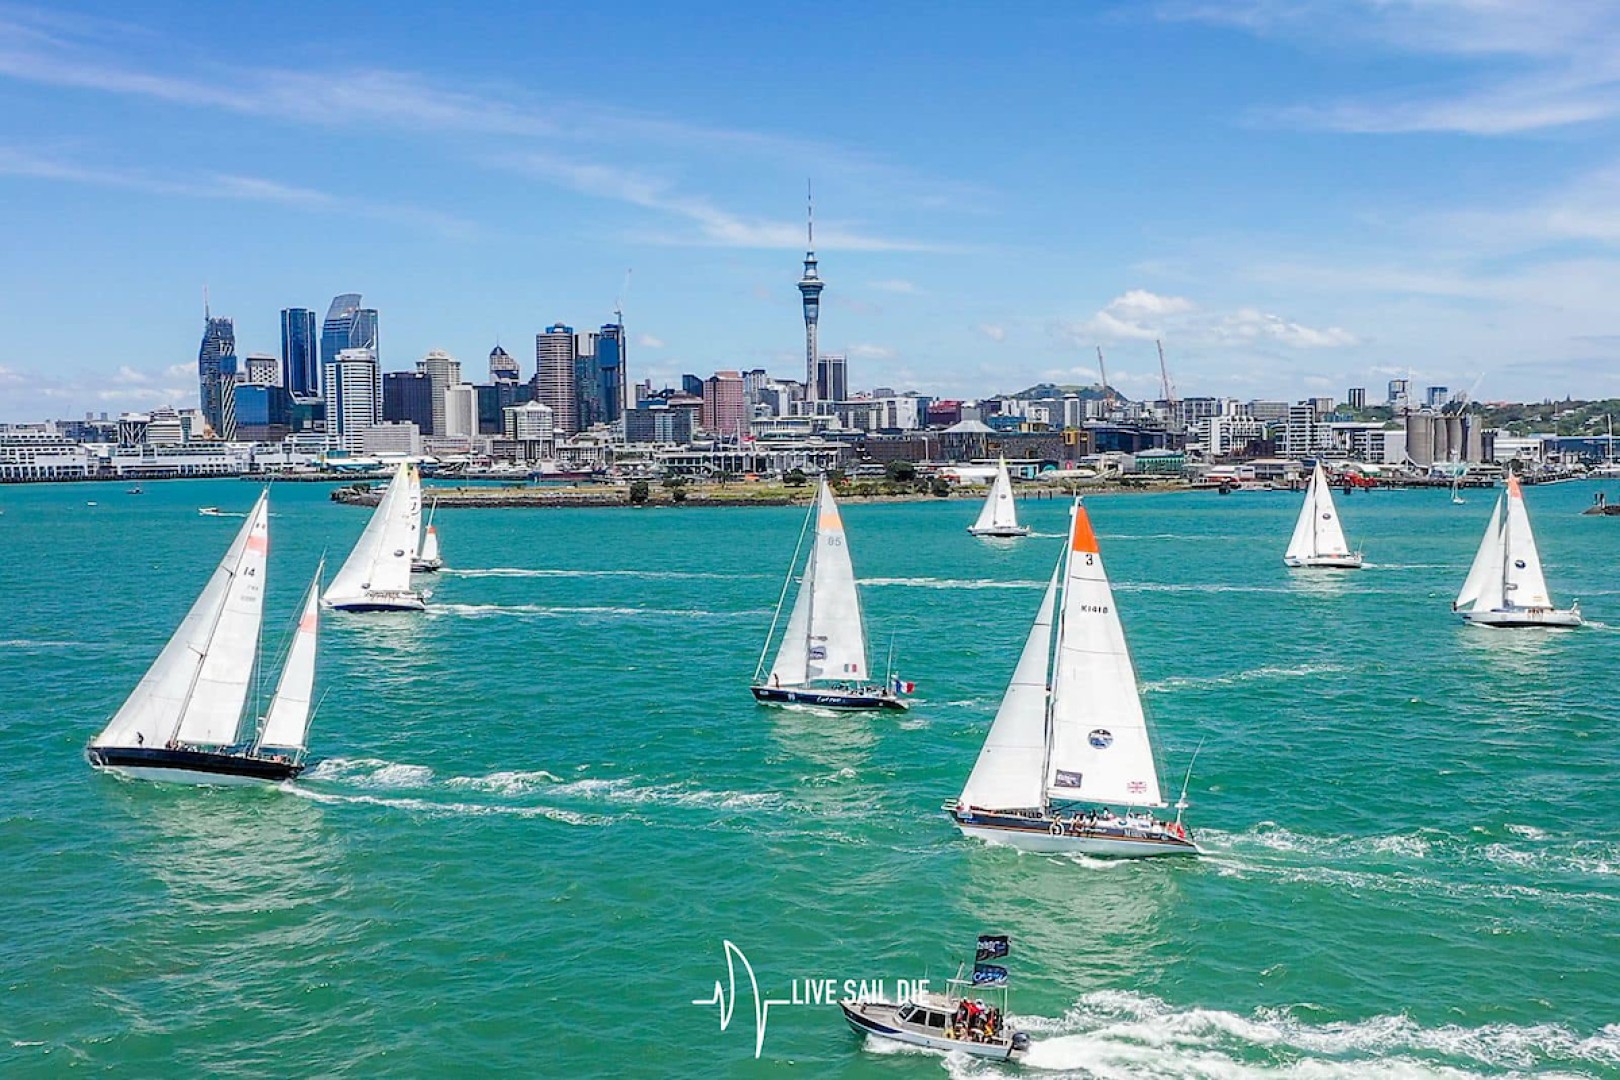 Spectacular blue skies in Auckland Harbour for the start of the Ocean Globe Race Leg 3 – Auckland to Punta del Este. Drone – LIVE SAIL DIE